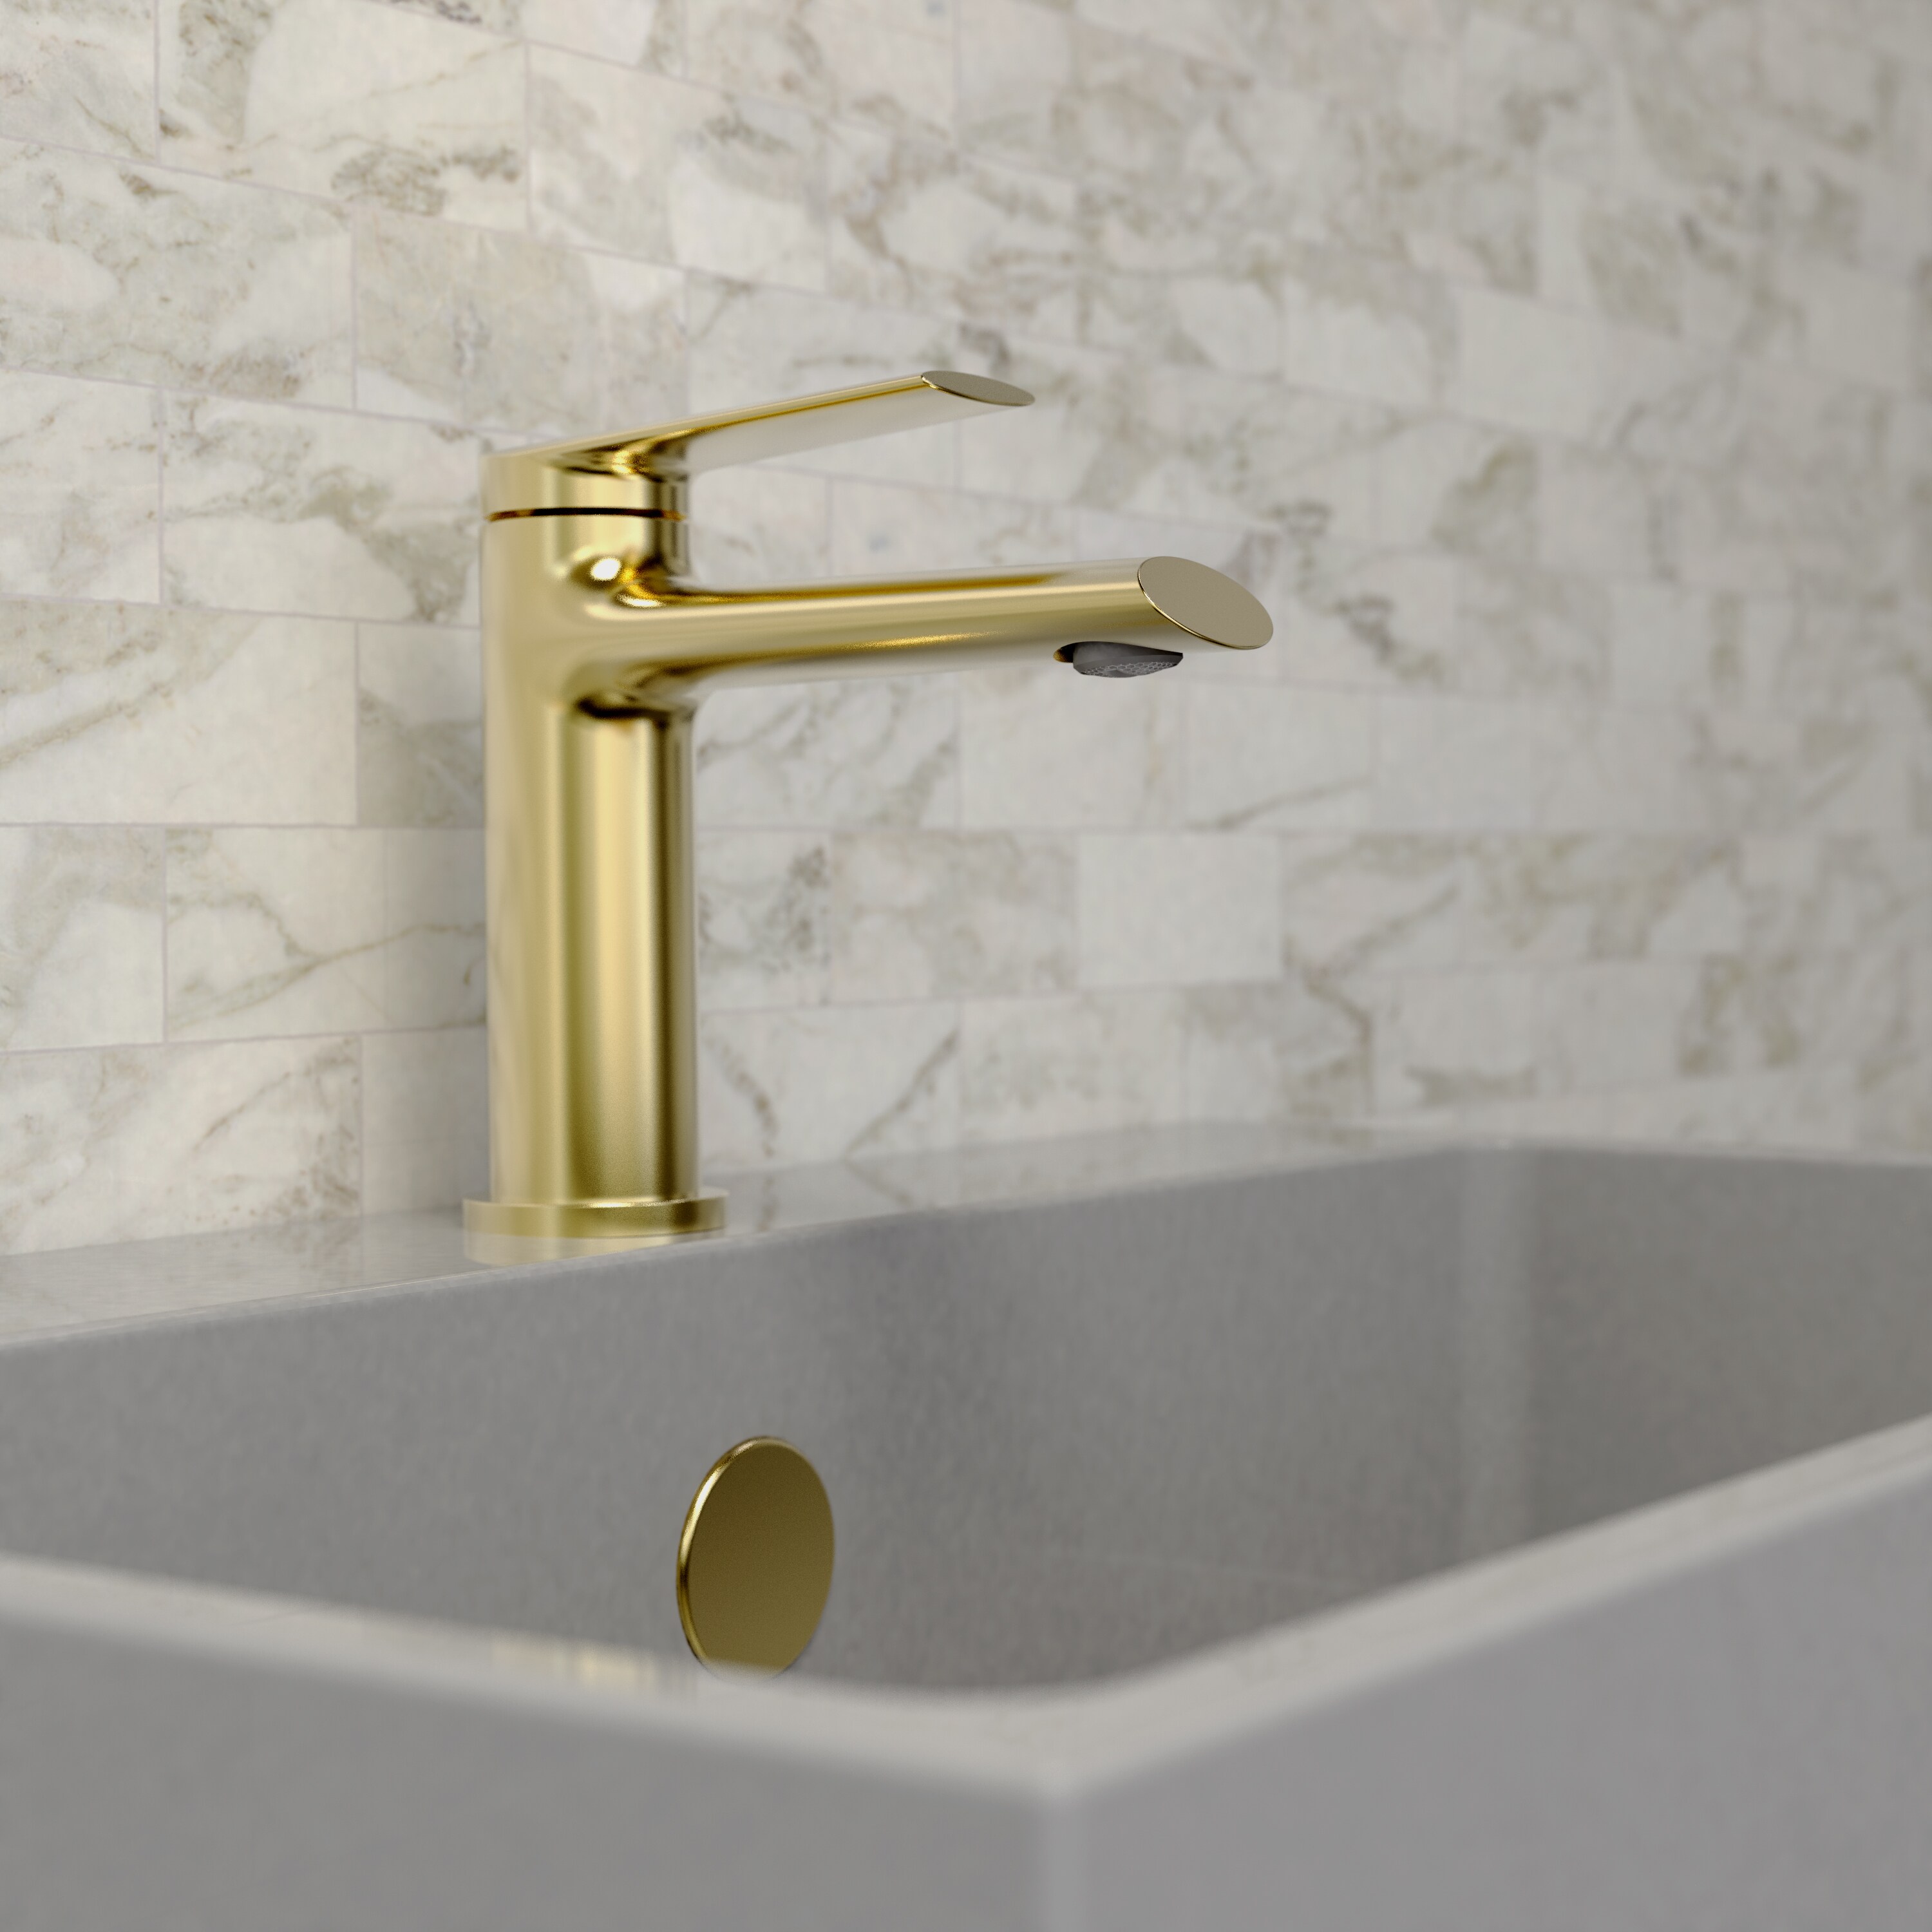 Belanger Opalia Matte Gold 1-handle Single Hole WaterSense Mid-arc Bathroom Sink Faucet with Drain with Deck Plate